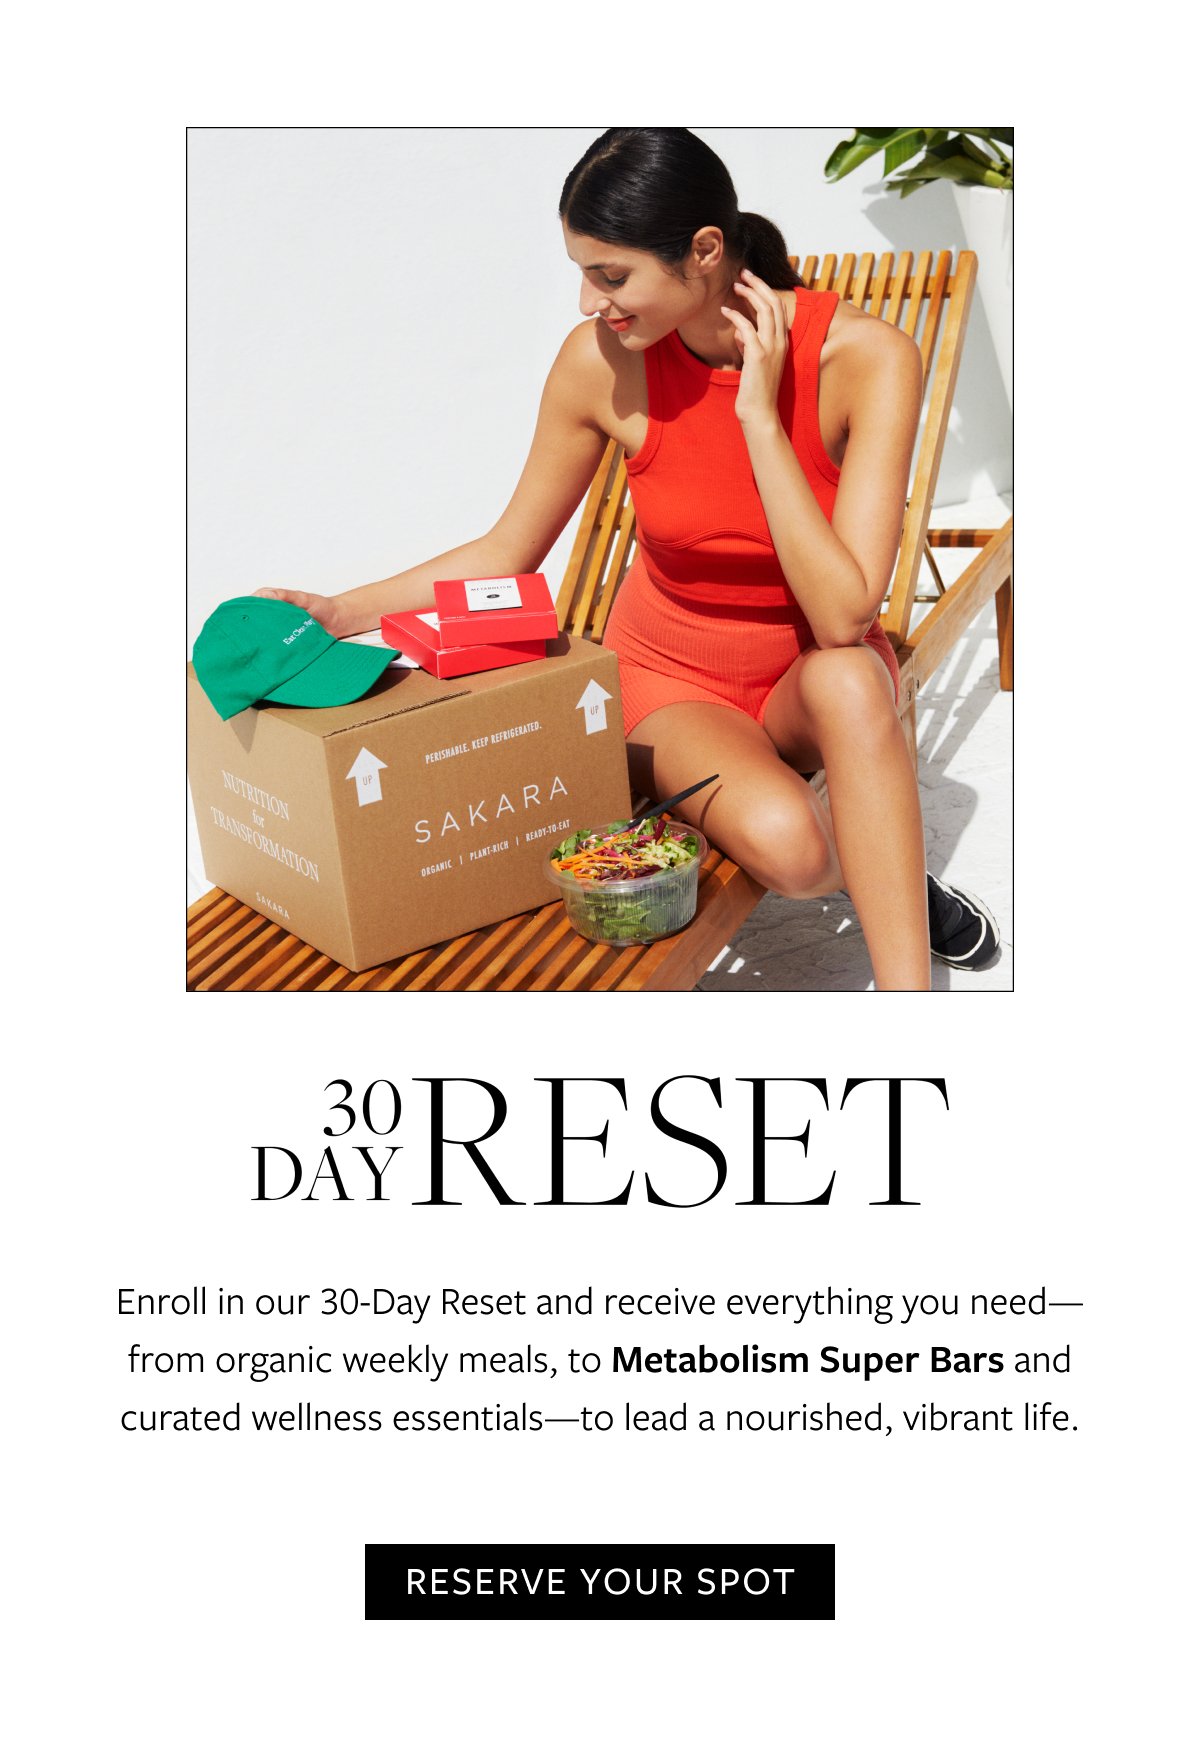 RESERVE YOUR SPOT For 30-Day Reset